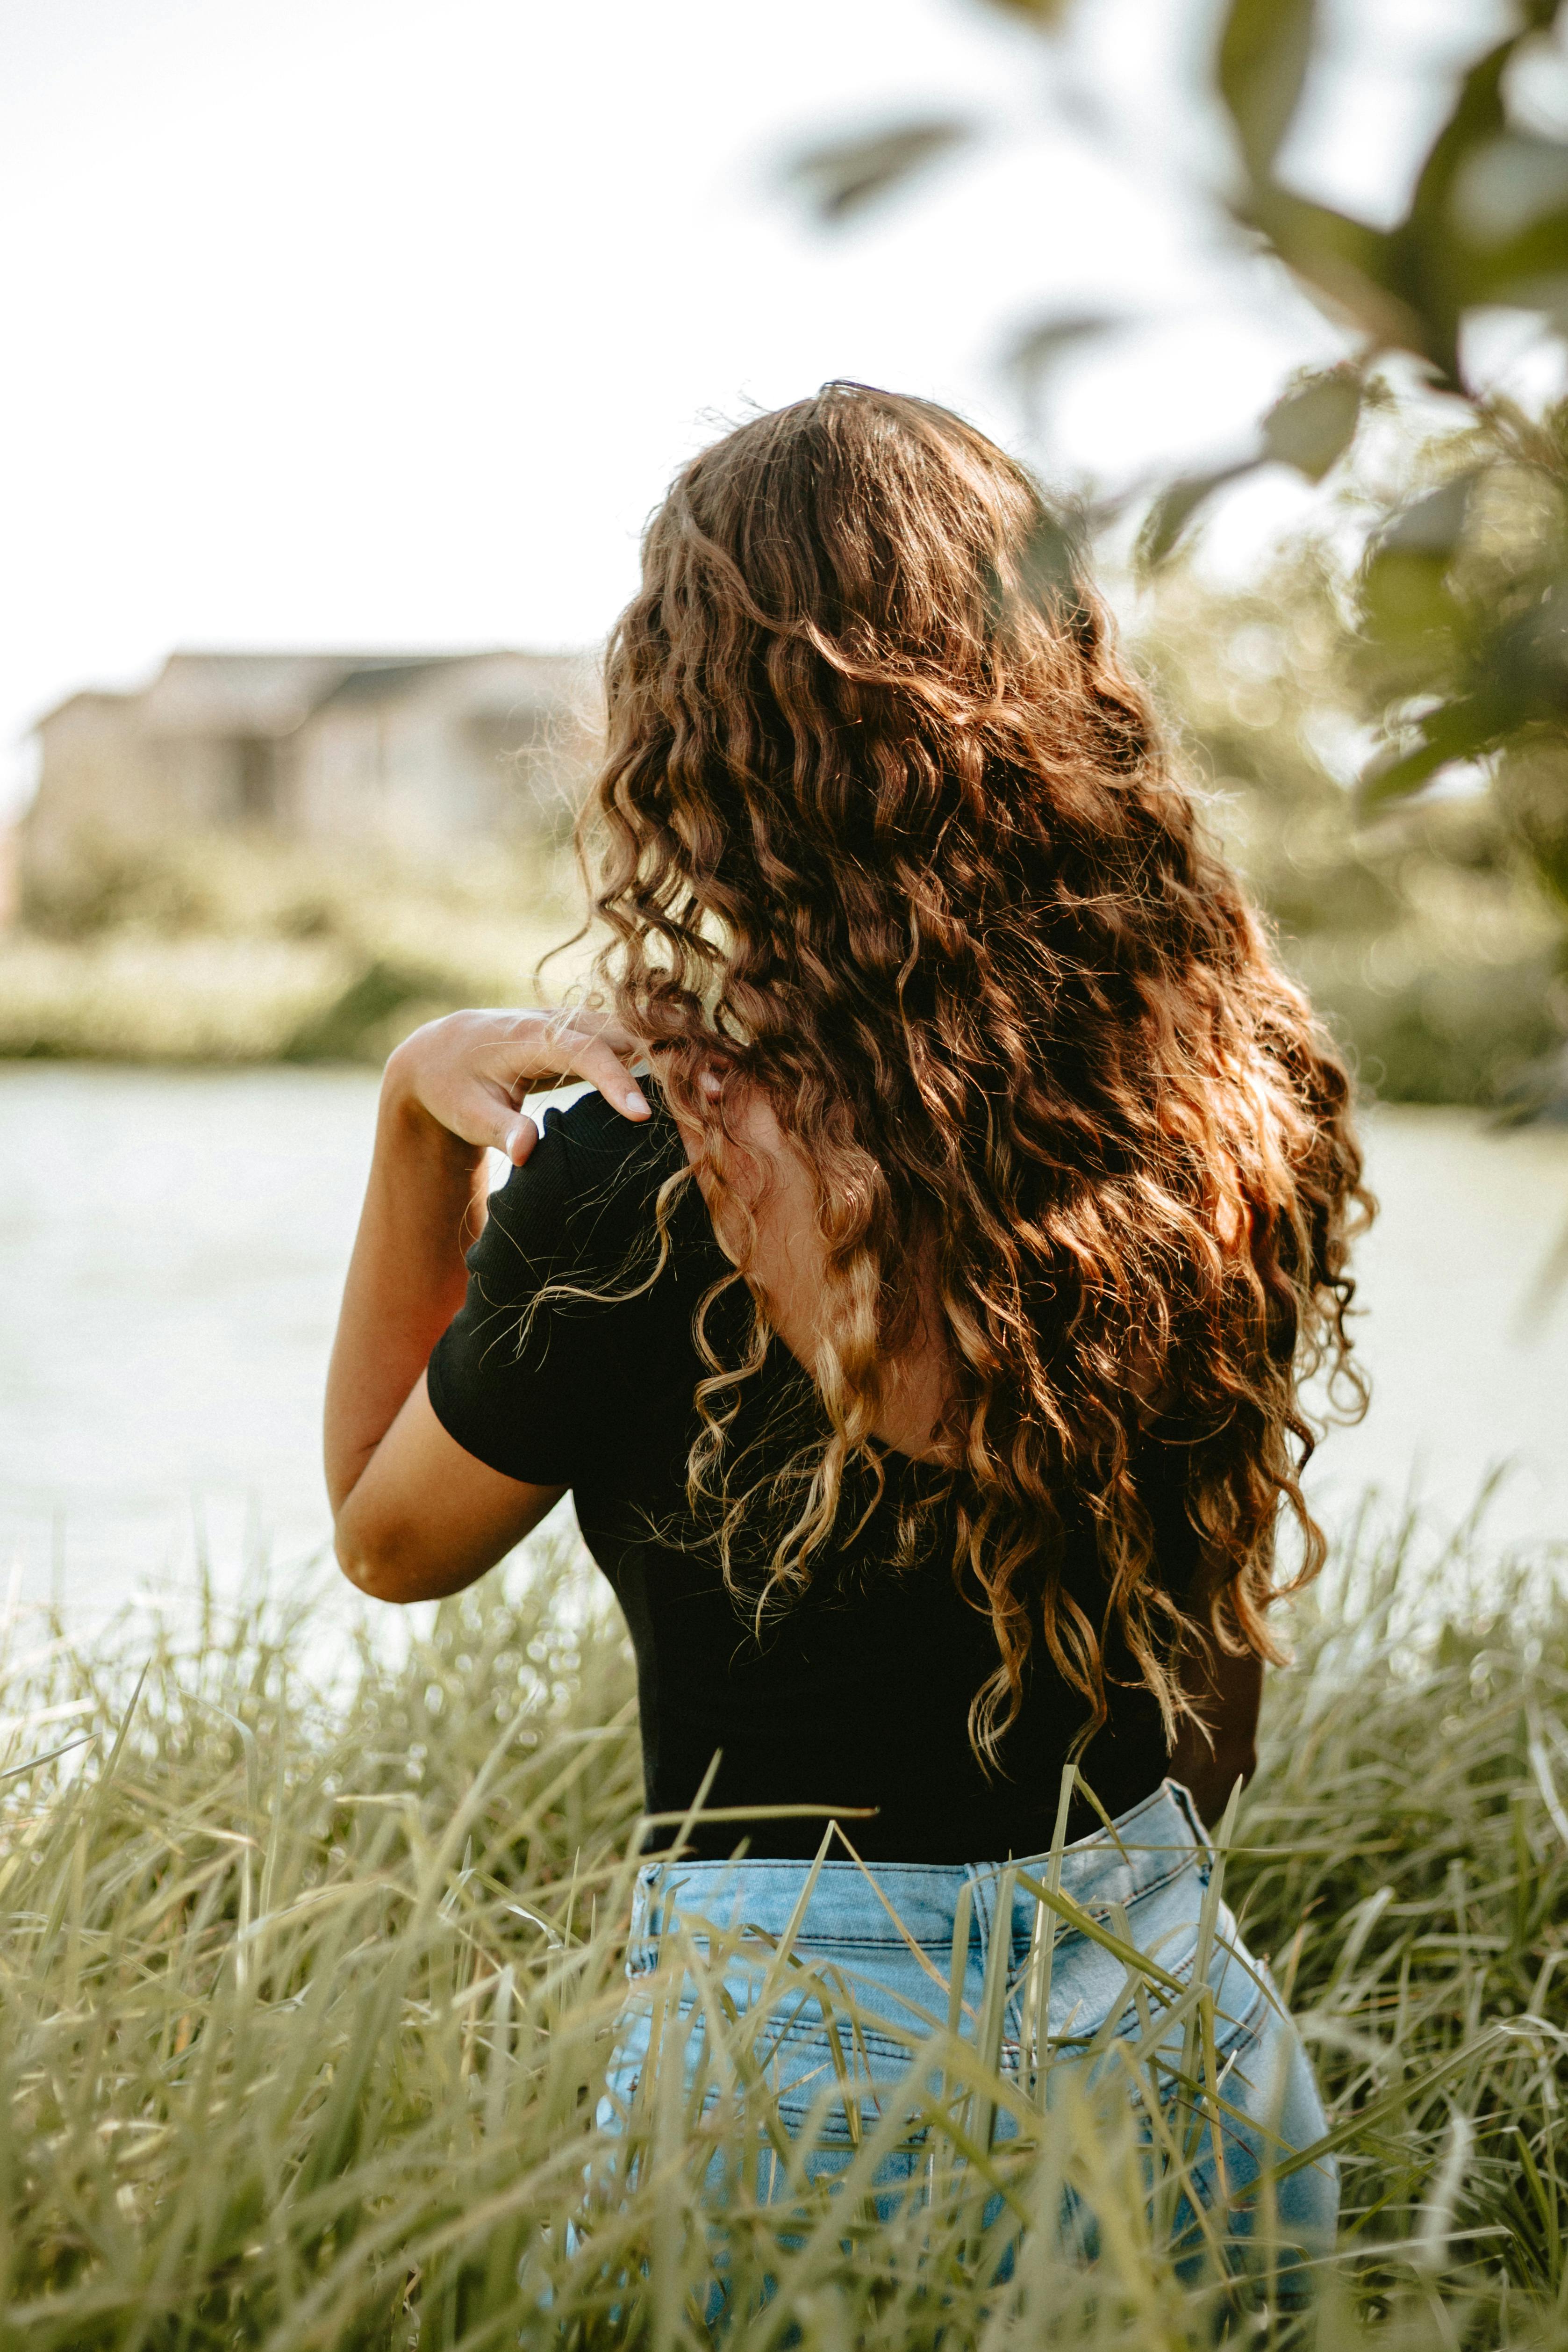 Back and Curly Hair of Girl Standing in Tall Grass · Free Stock Photo